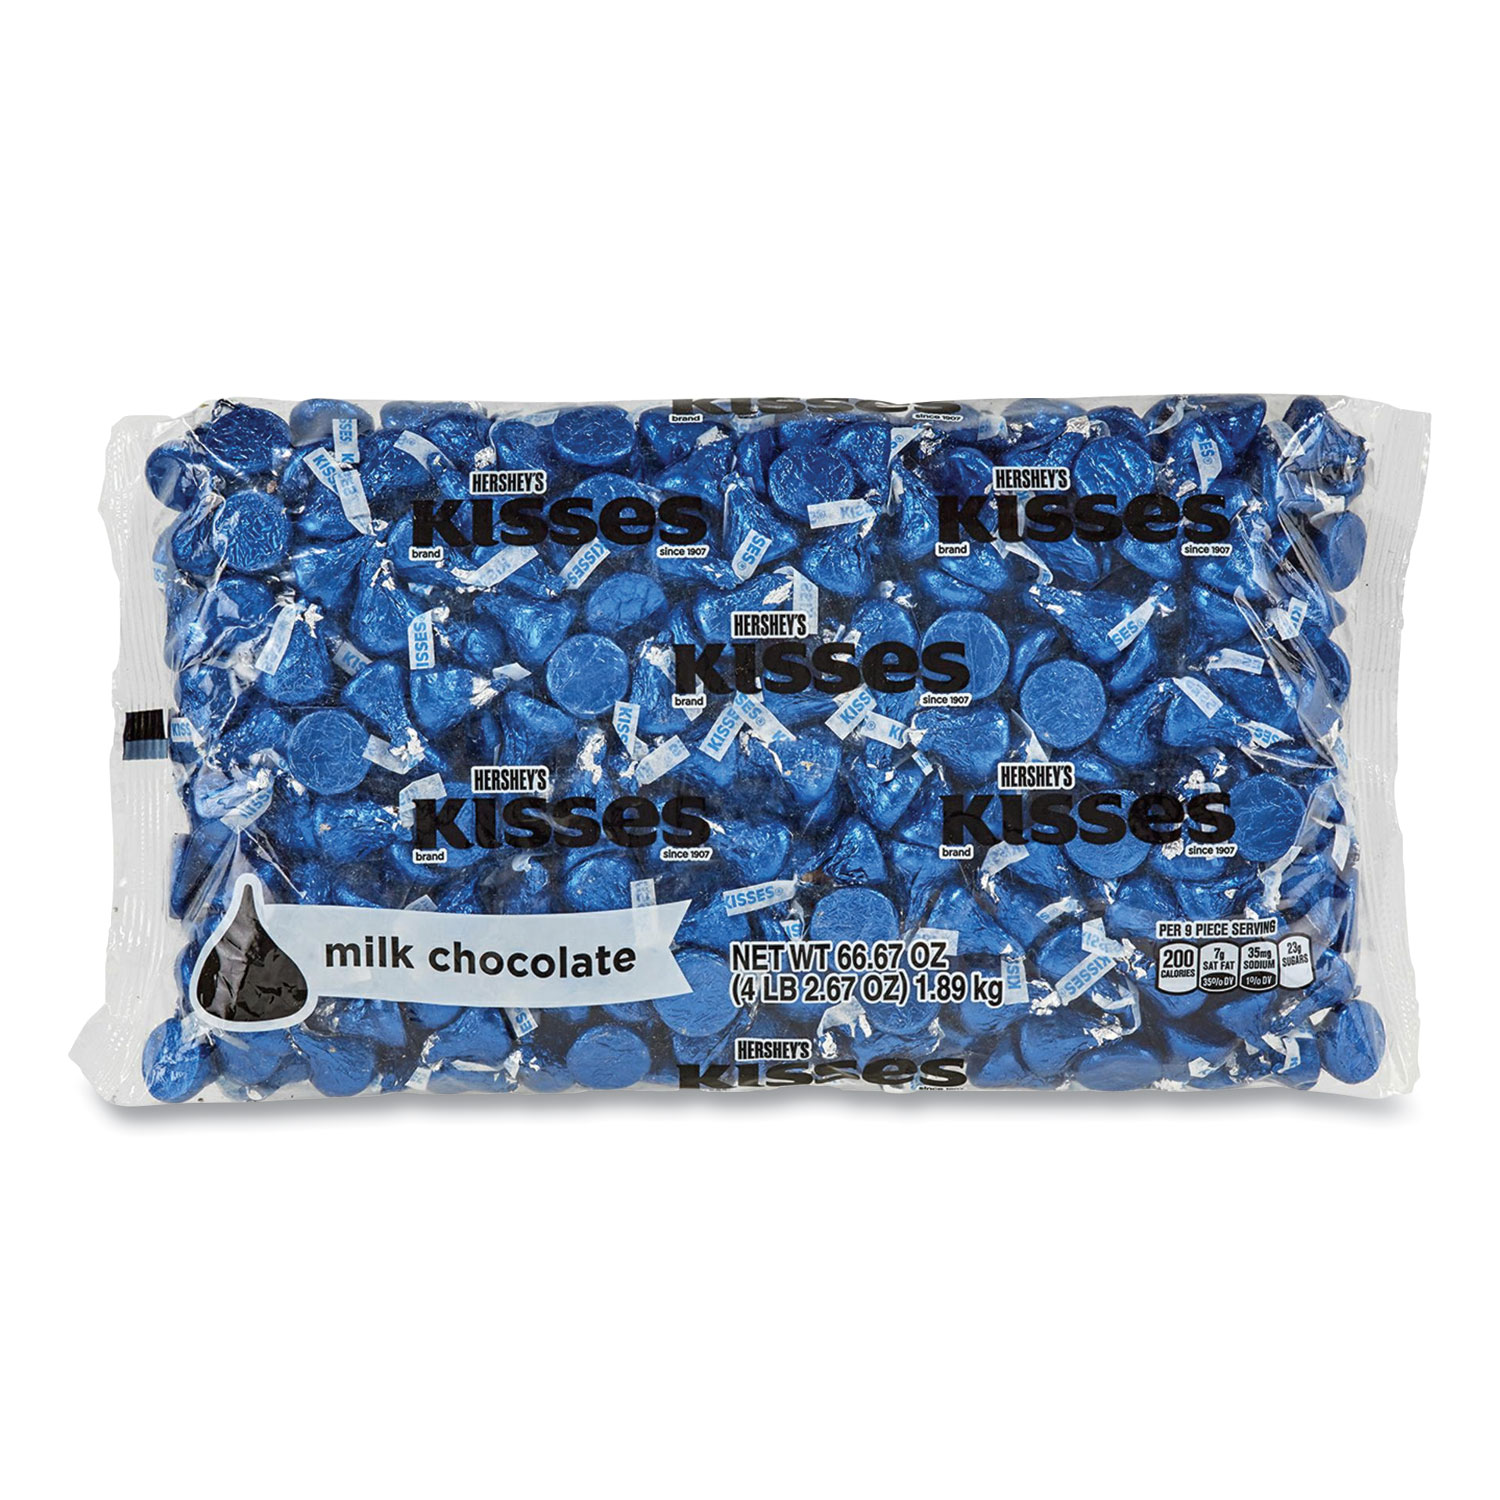  Hershey's 16019 KISSES, Milk Chocolate, Dark Blue Wrappers, 66.7 oz Bag, Free Delivery in 1-4 Business Days (GRR24600082) 